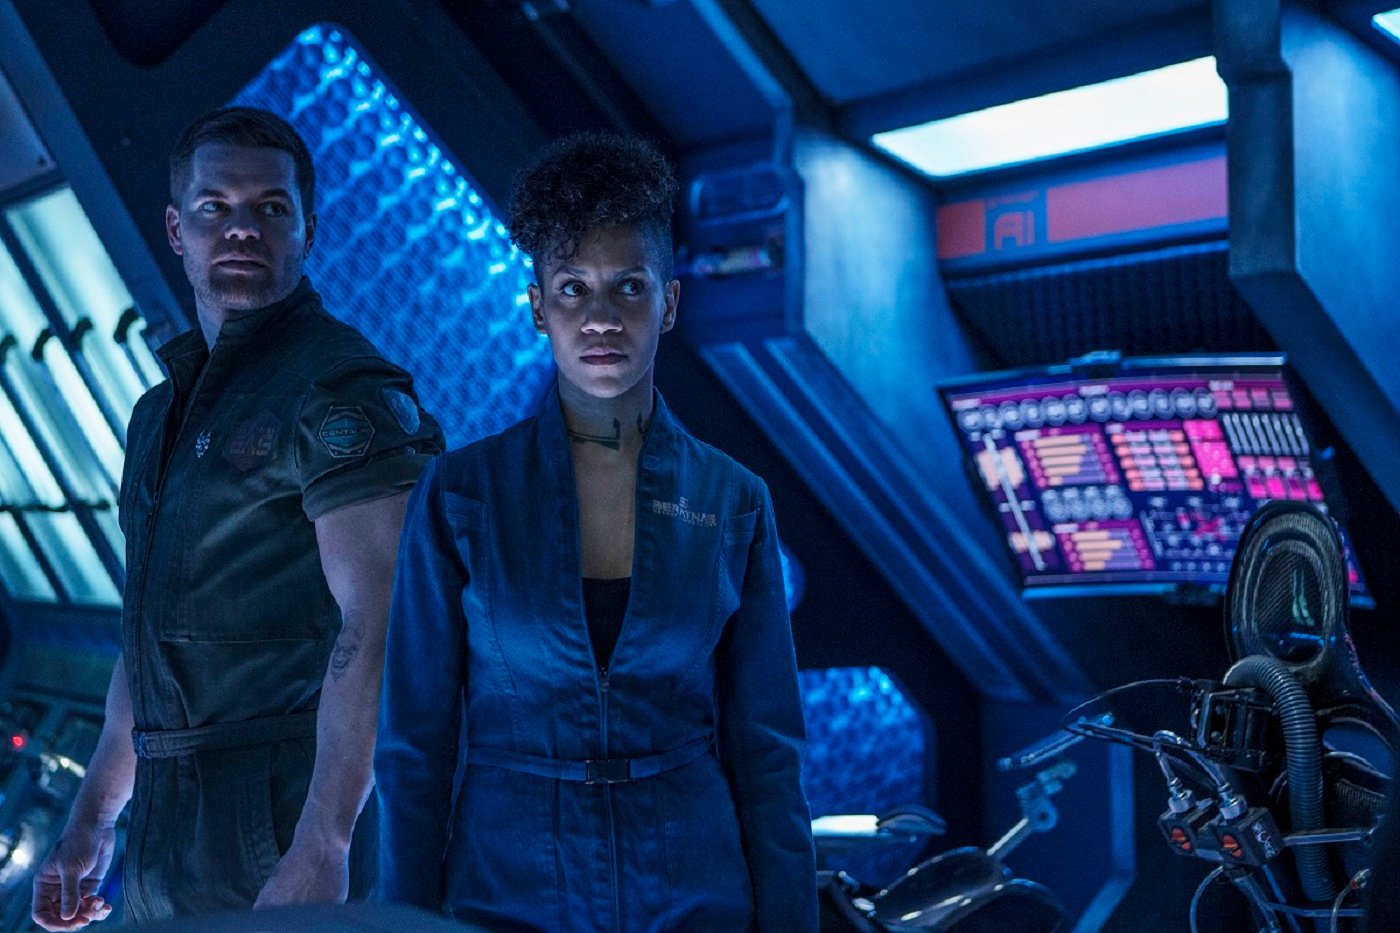 The Expanse Season 6 will see Wes Chatham as Amos Burton and Dominique Tipper as Naomi Nagata. Amos wears his green jumpsuit, Naomi her blue, both look to the right, off-screen. 